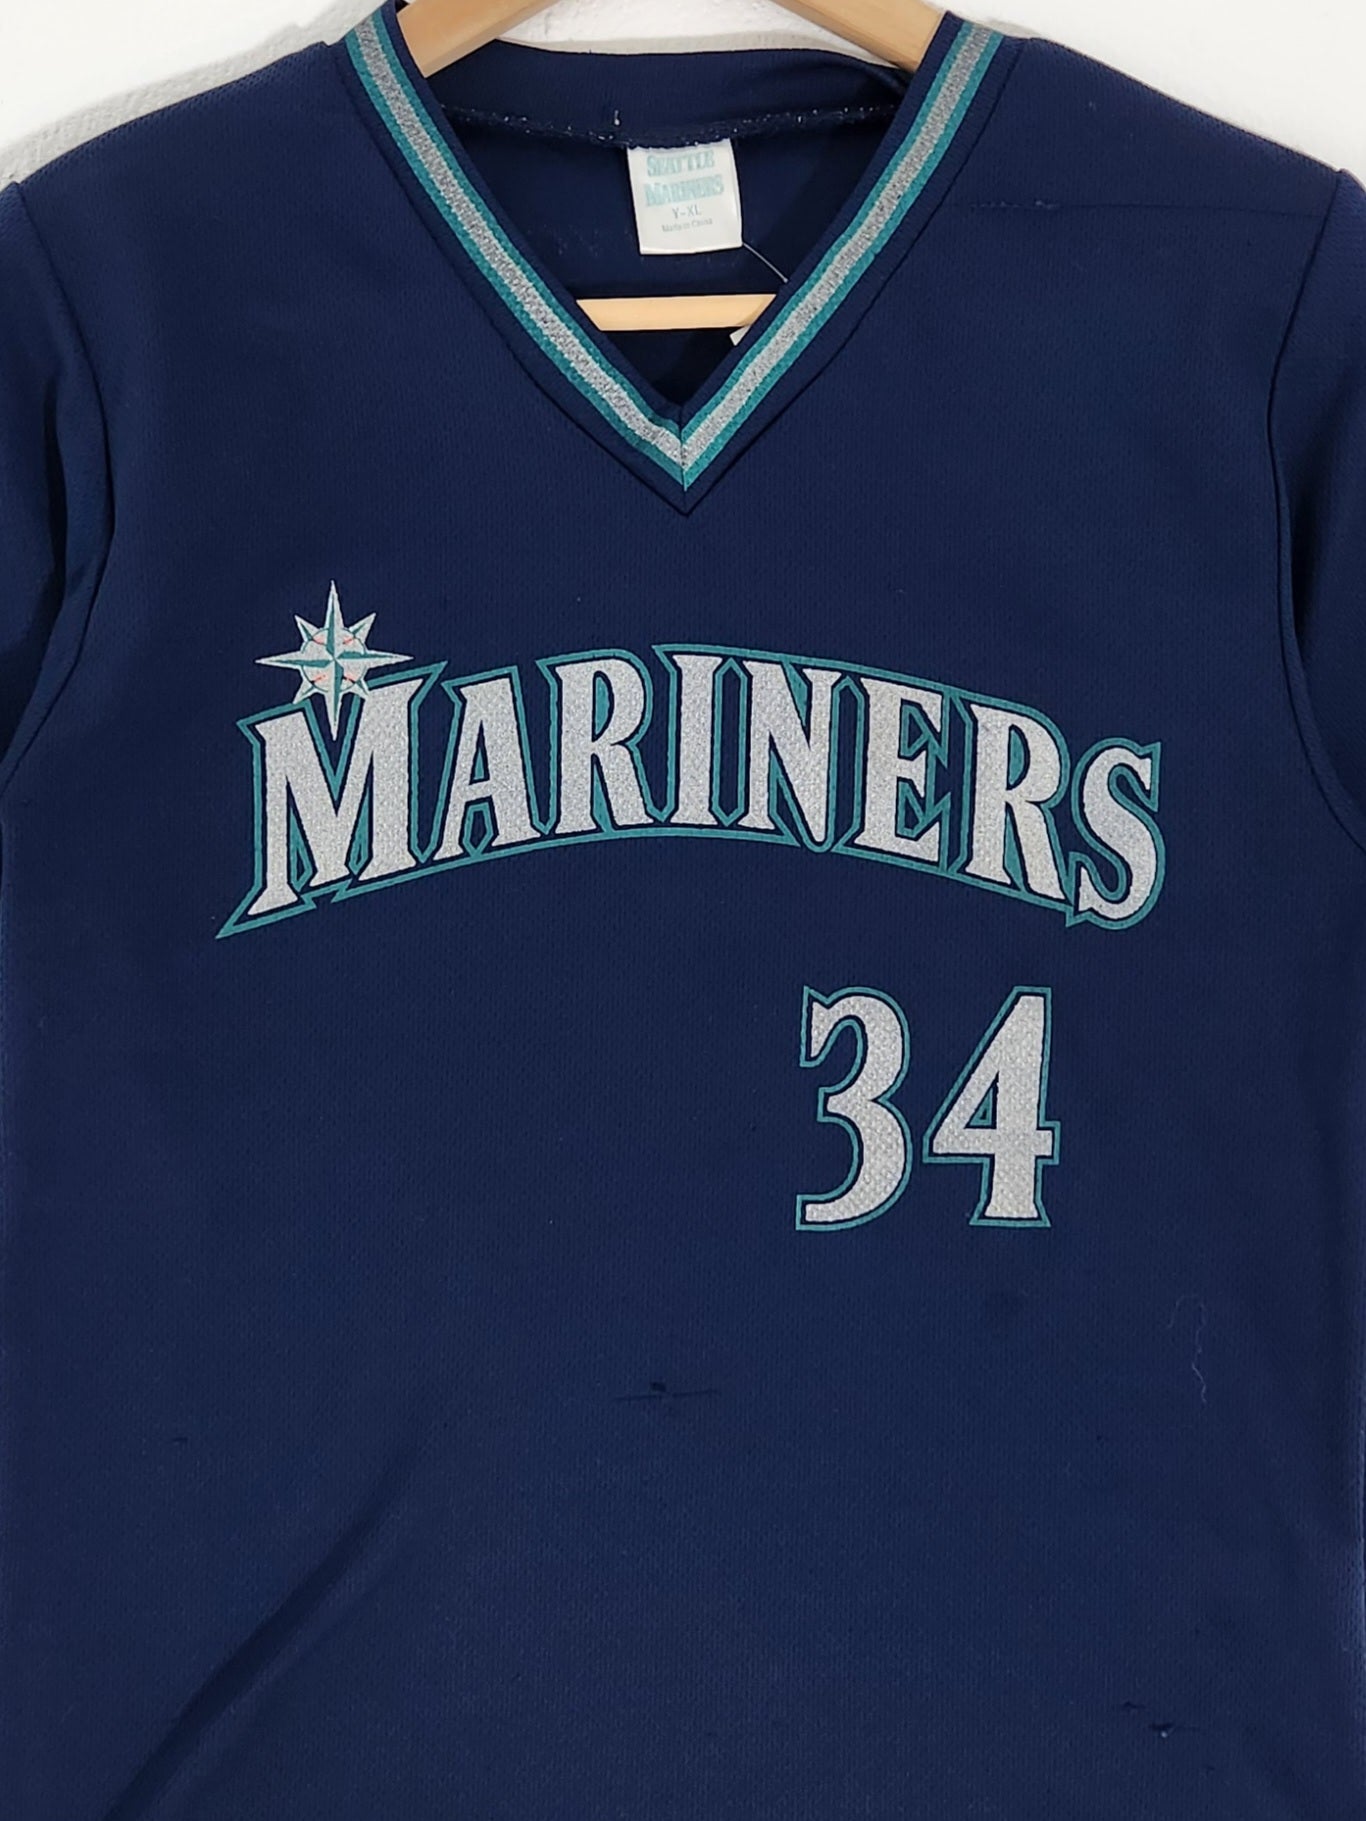 Seattle Mariners Game Used MLB Jerseys for sale